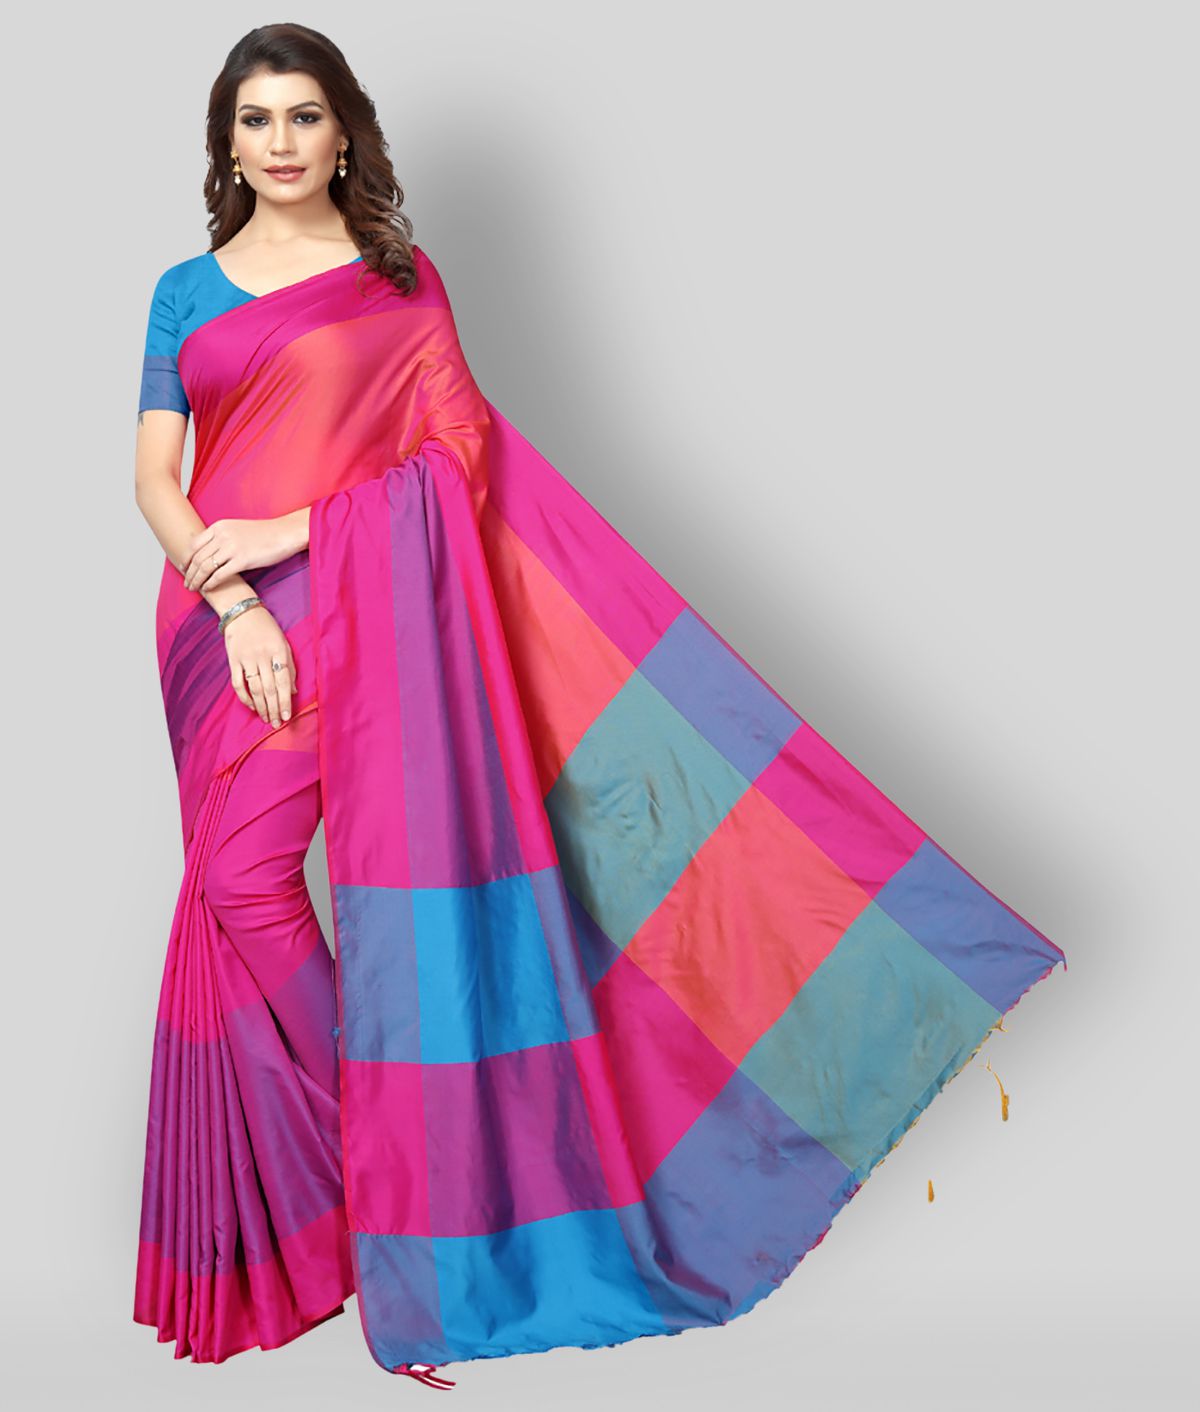 NightBlue - Multicolor Cotton Blend Saree With Blouse Piece ( Pack of 1 )